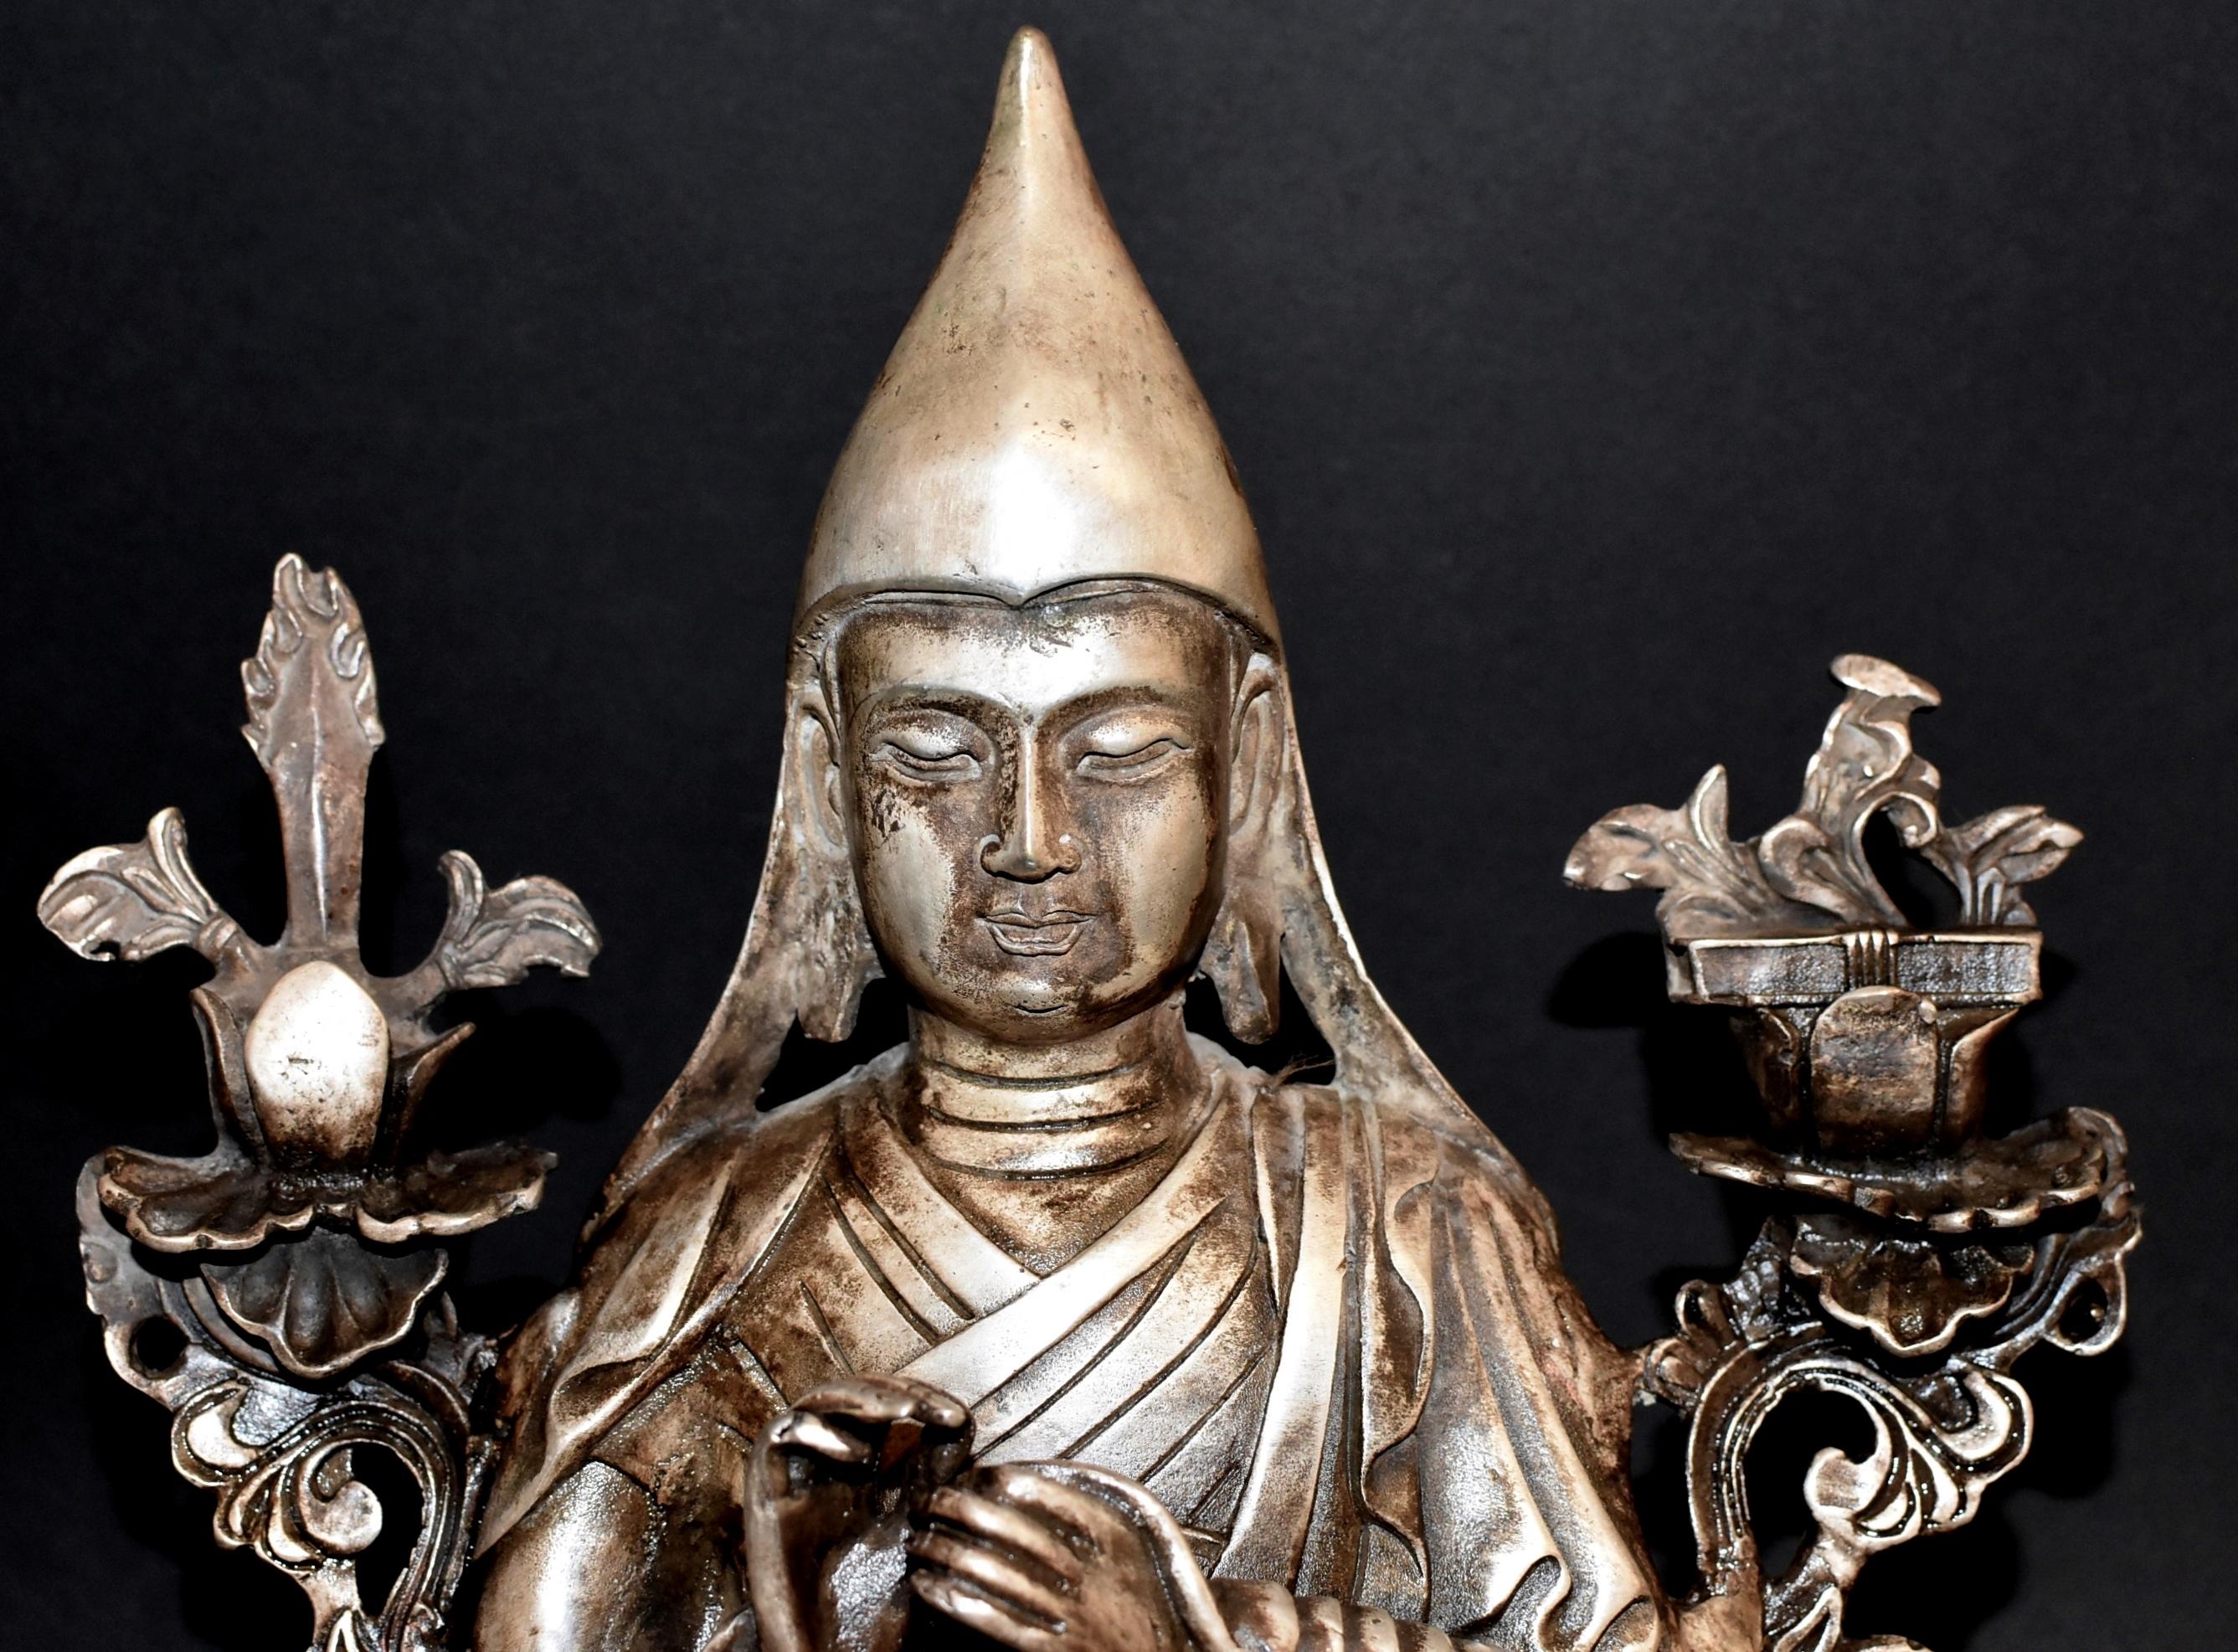 A fine silver bronze statue of the Tibetan teacher Tsongkhapa. Je Tshongkhapa is the teacher of Tibetan Buddhism whose activities formed the Gelug school of Tibetan Buddhism. He is believed to be the reincarnation of God of wisdom. The statue